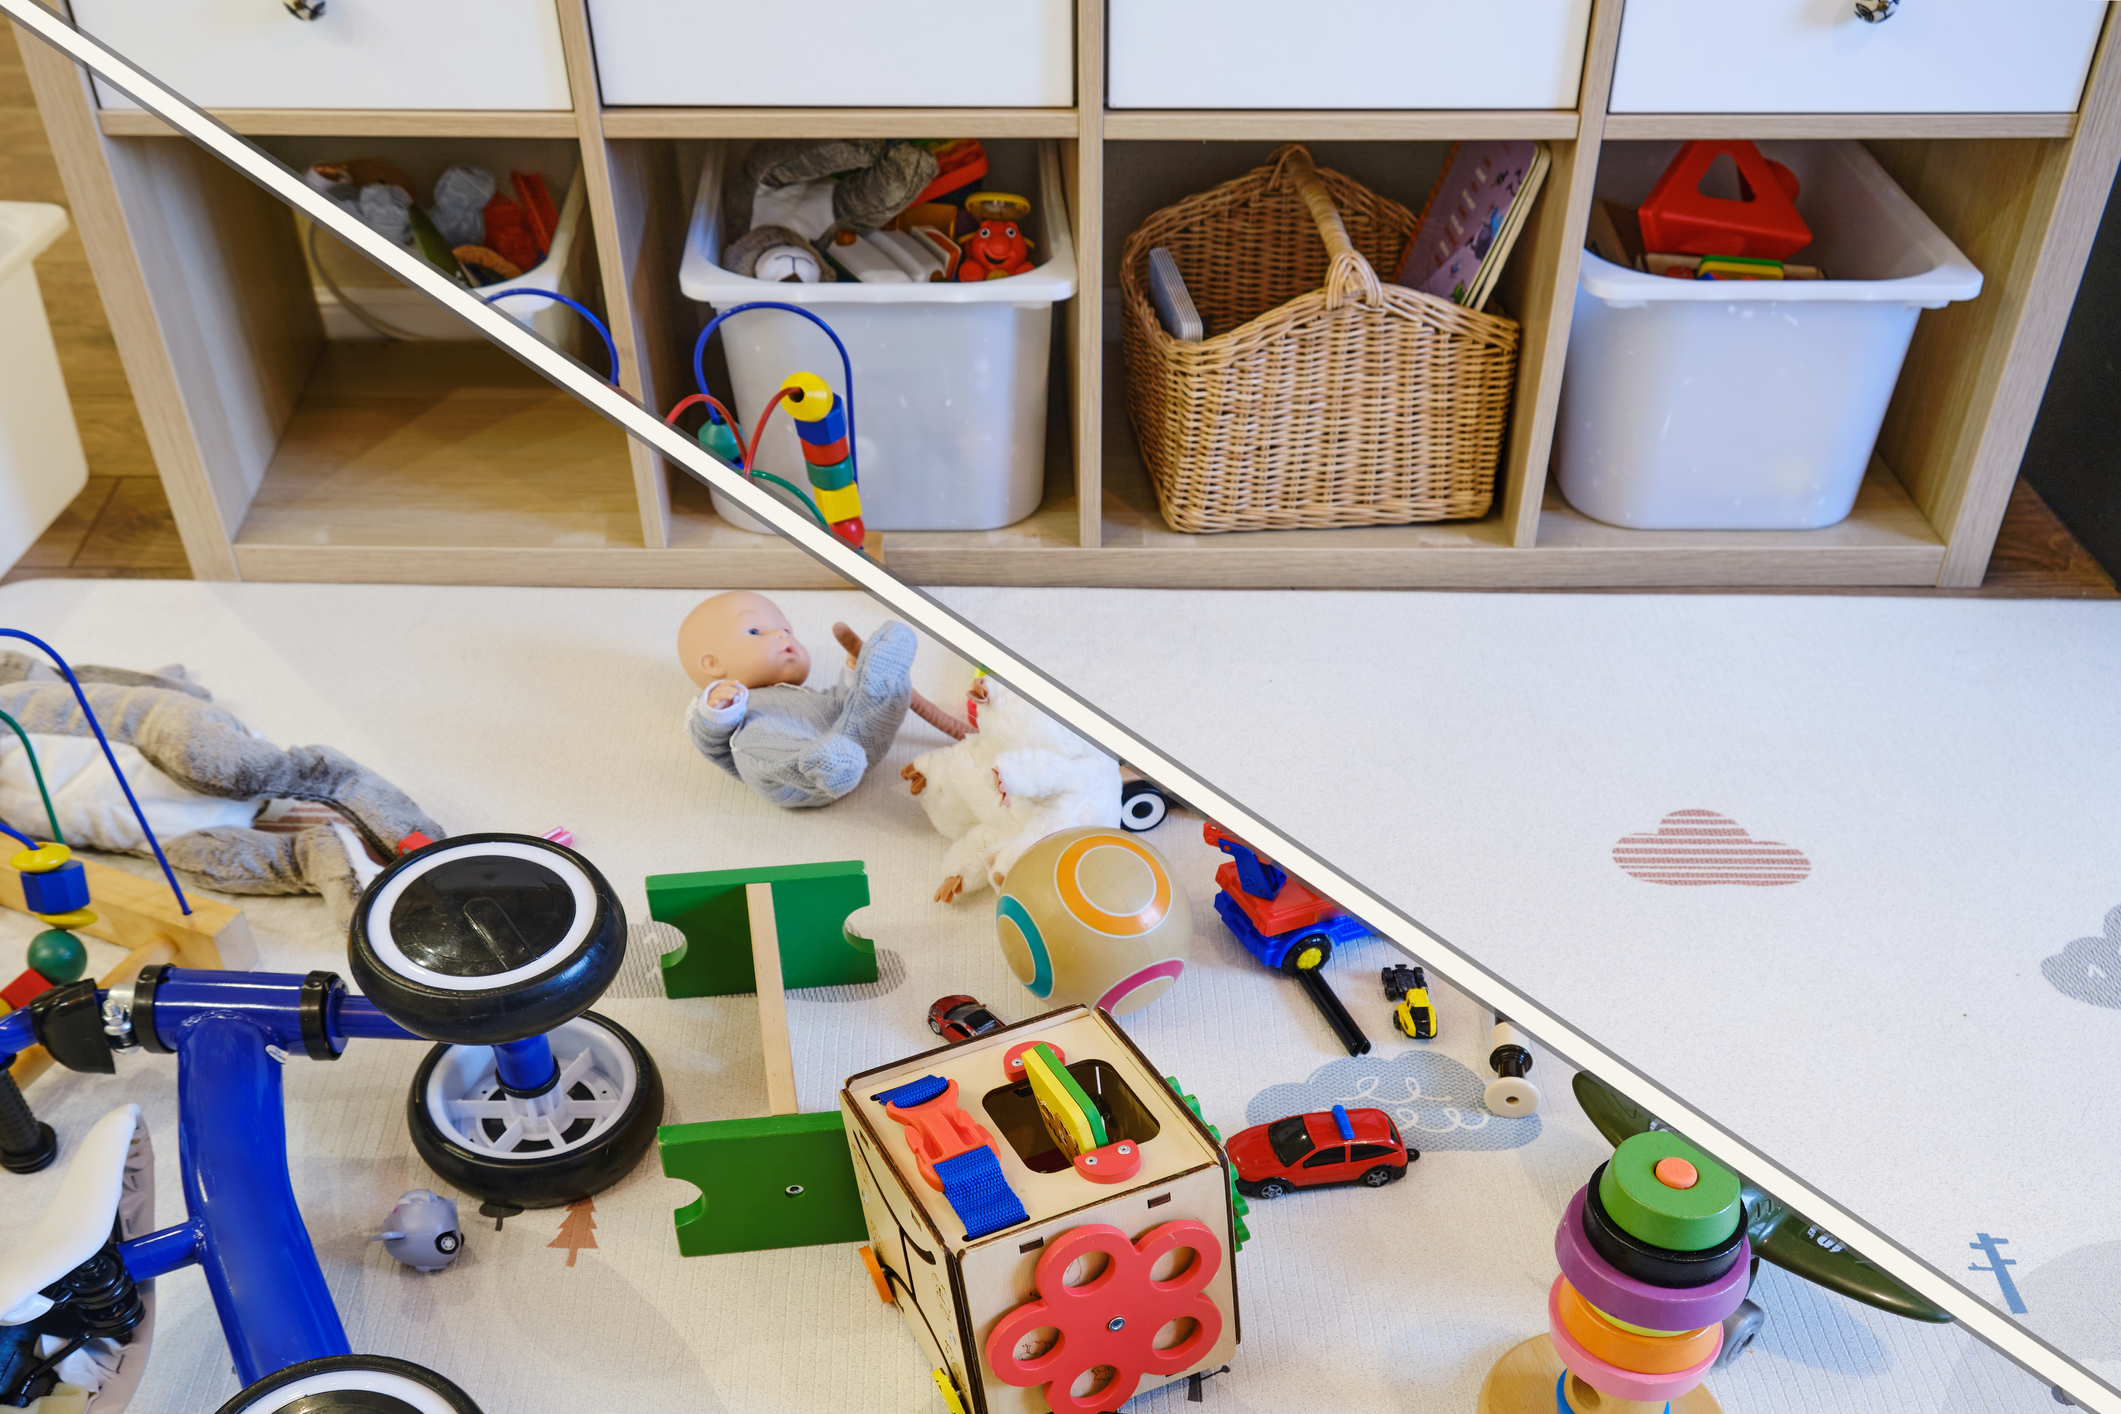 clearing the clutter and organizing children's toys in a playroom